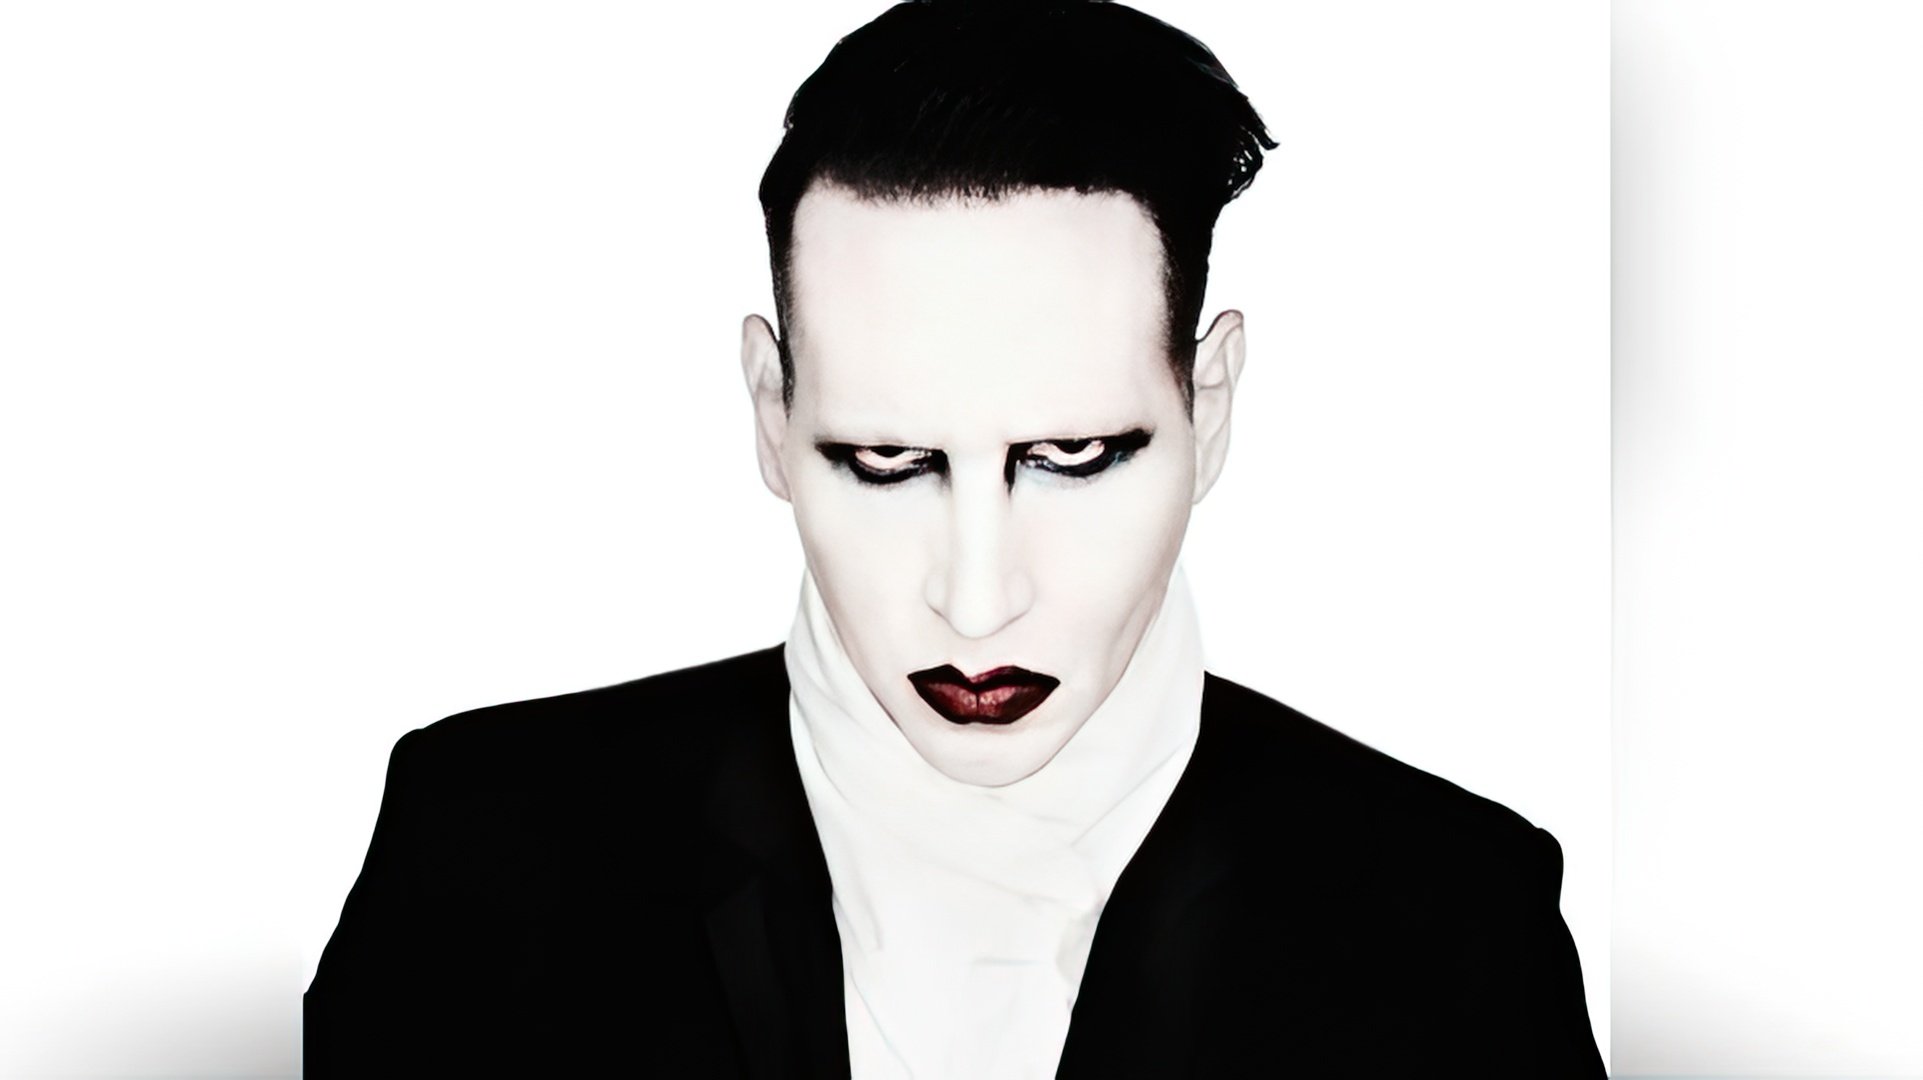 The Pale Emperor is one of Marilyn Manson's alter egos